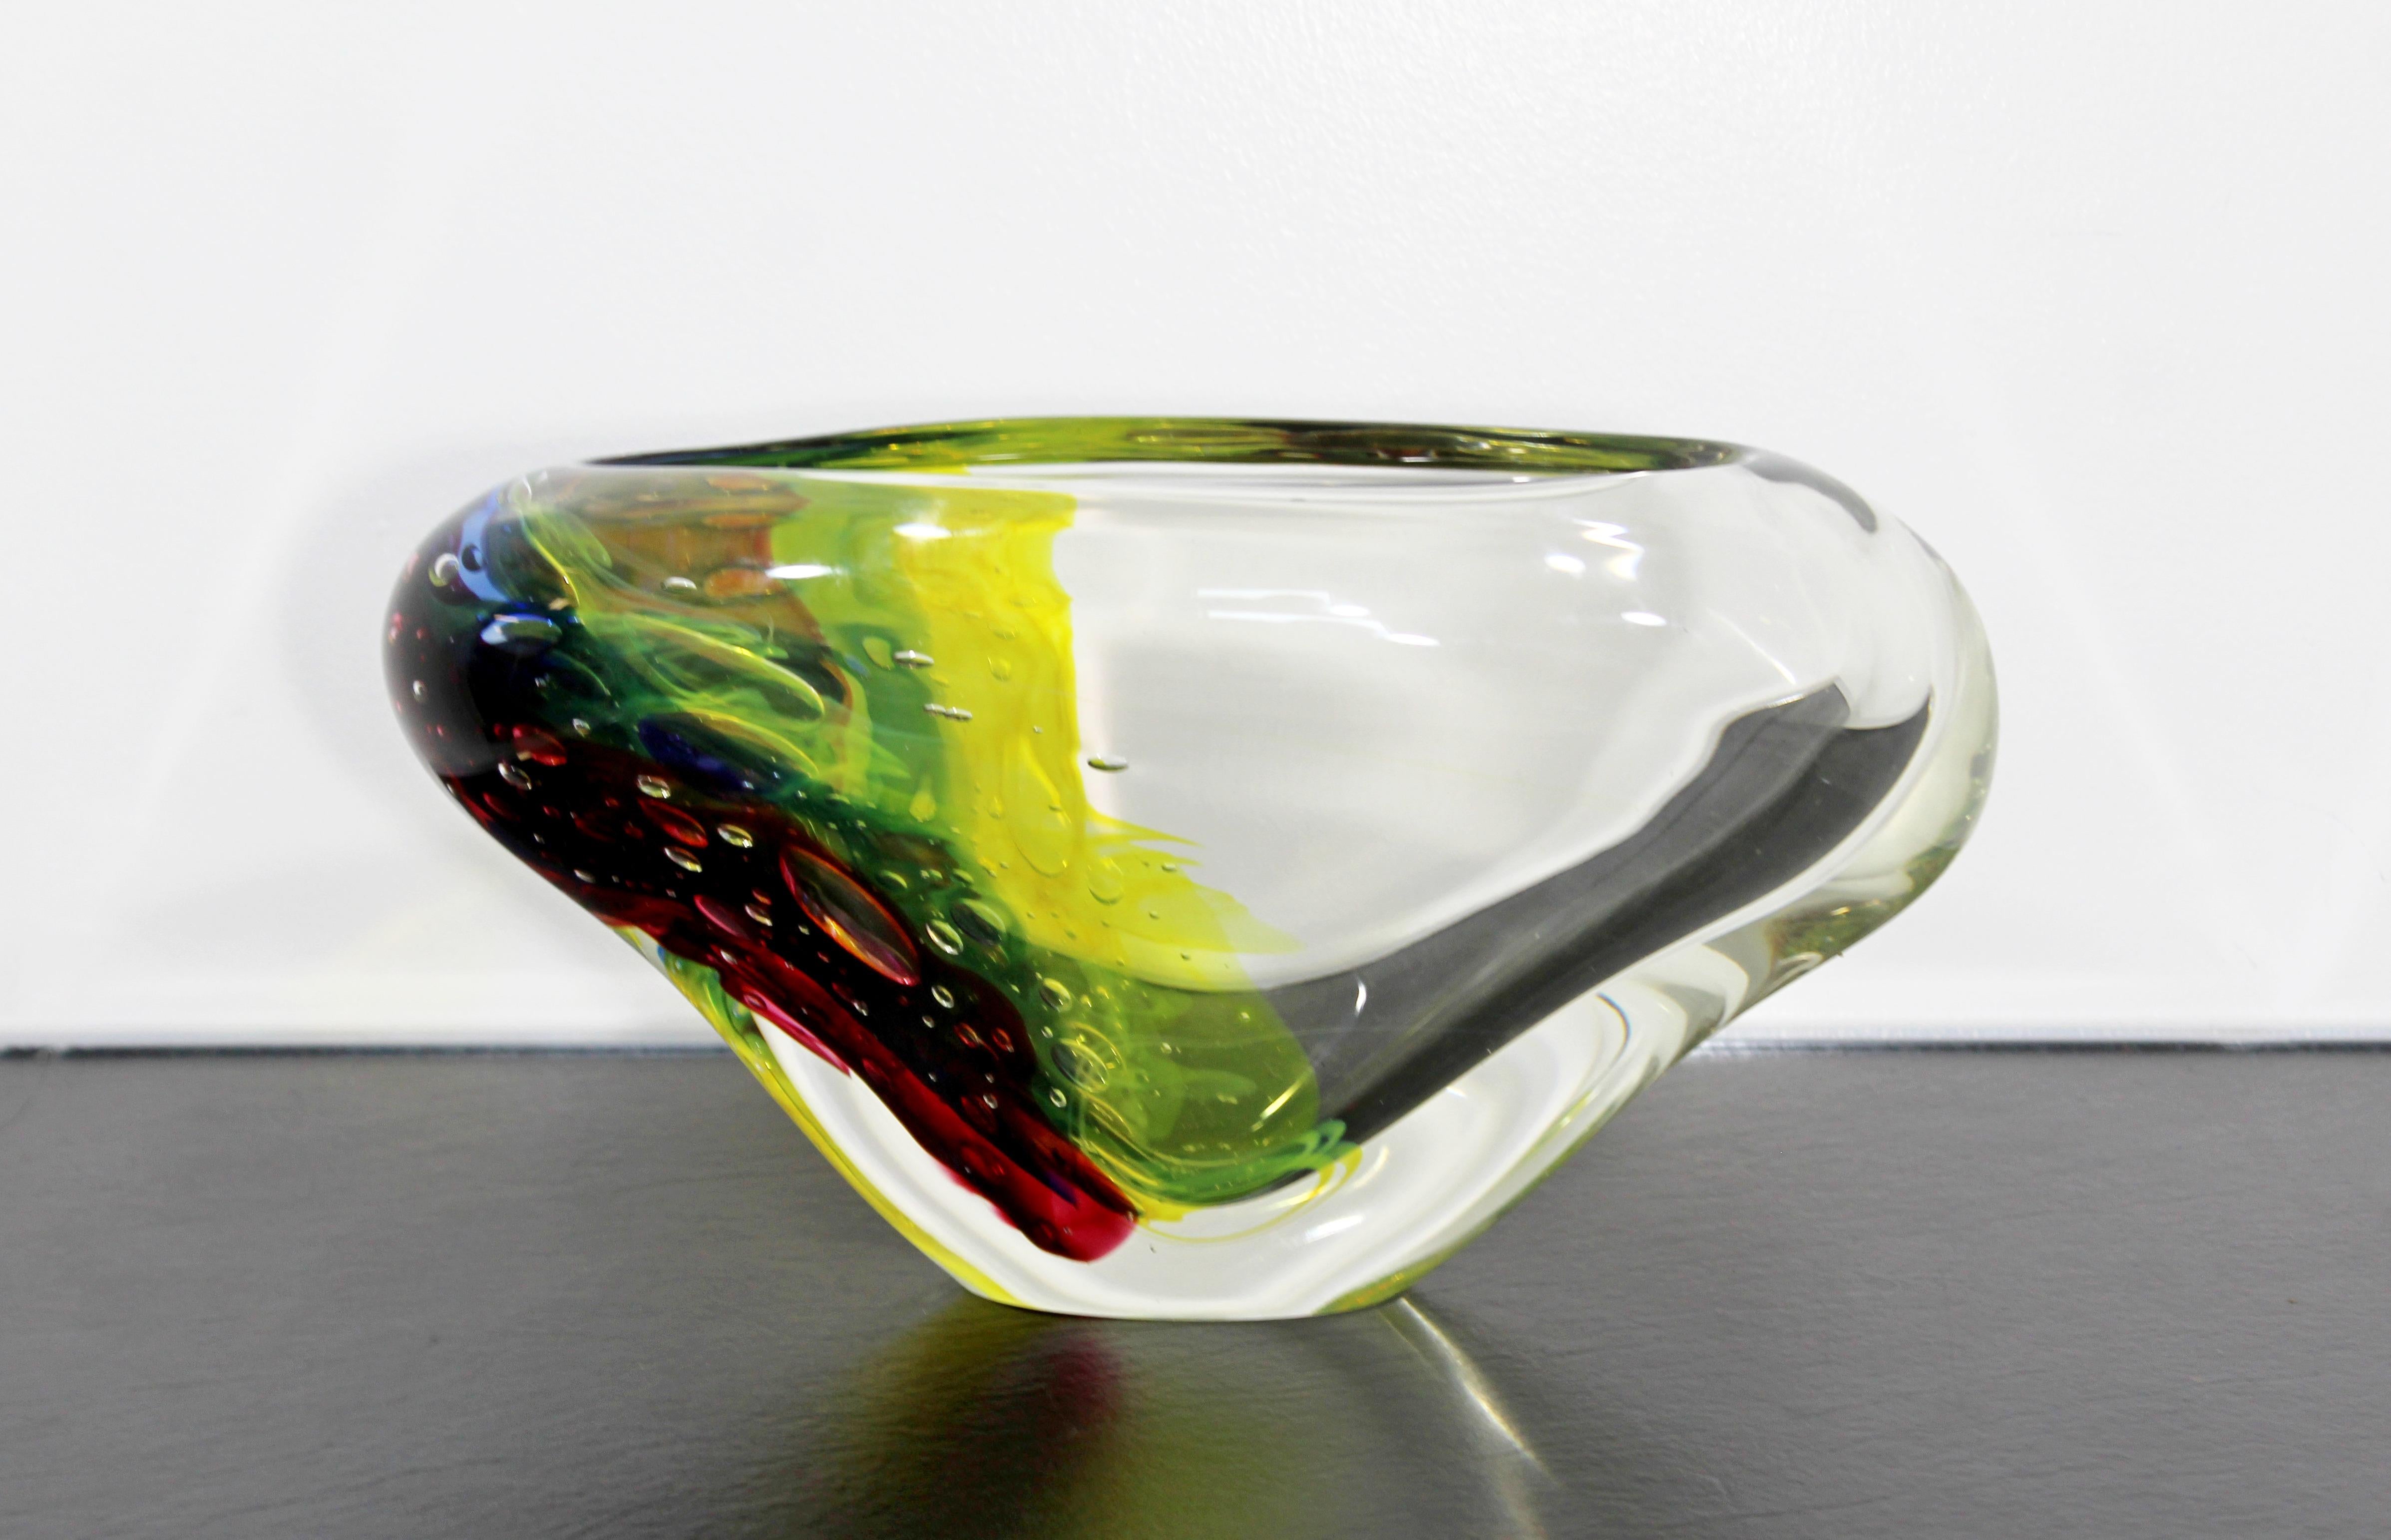 Late 20th Century Mid-Century Modern Signed L. Onesto Murano Glass Art Bowl Table Sculpture, Italy